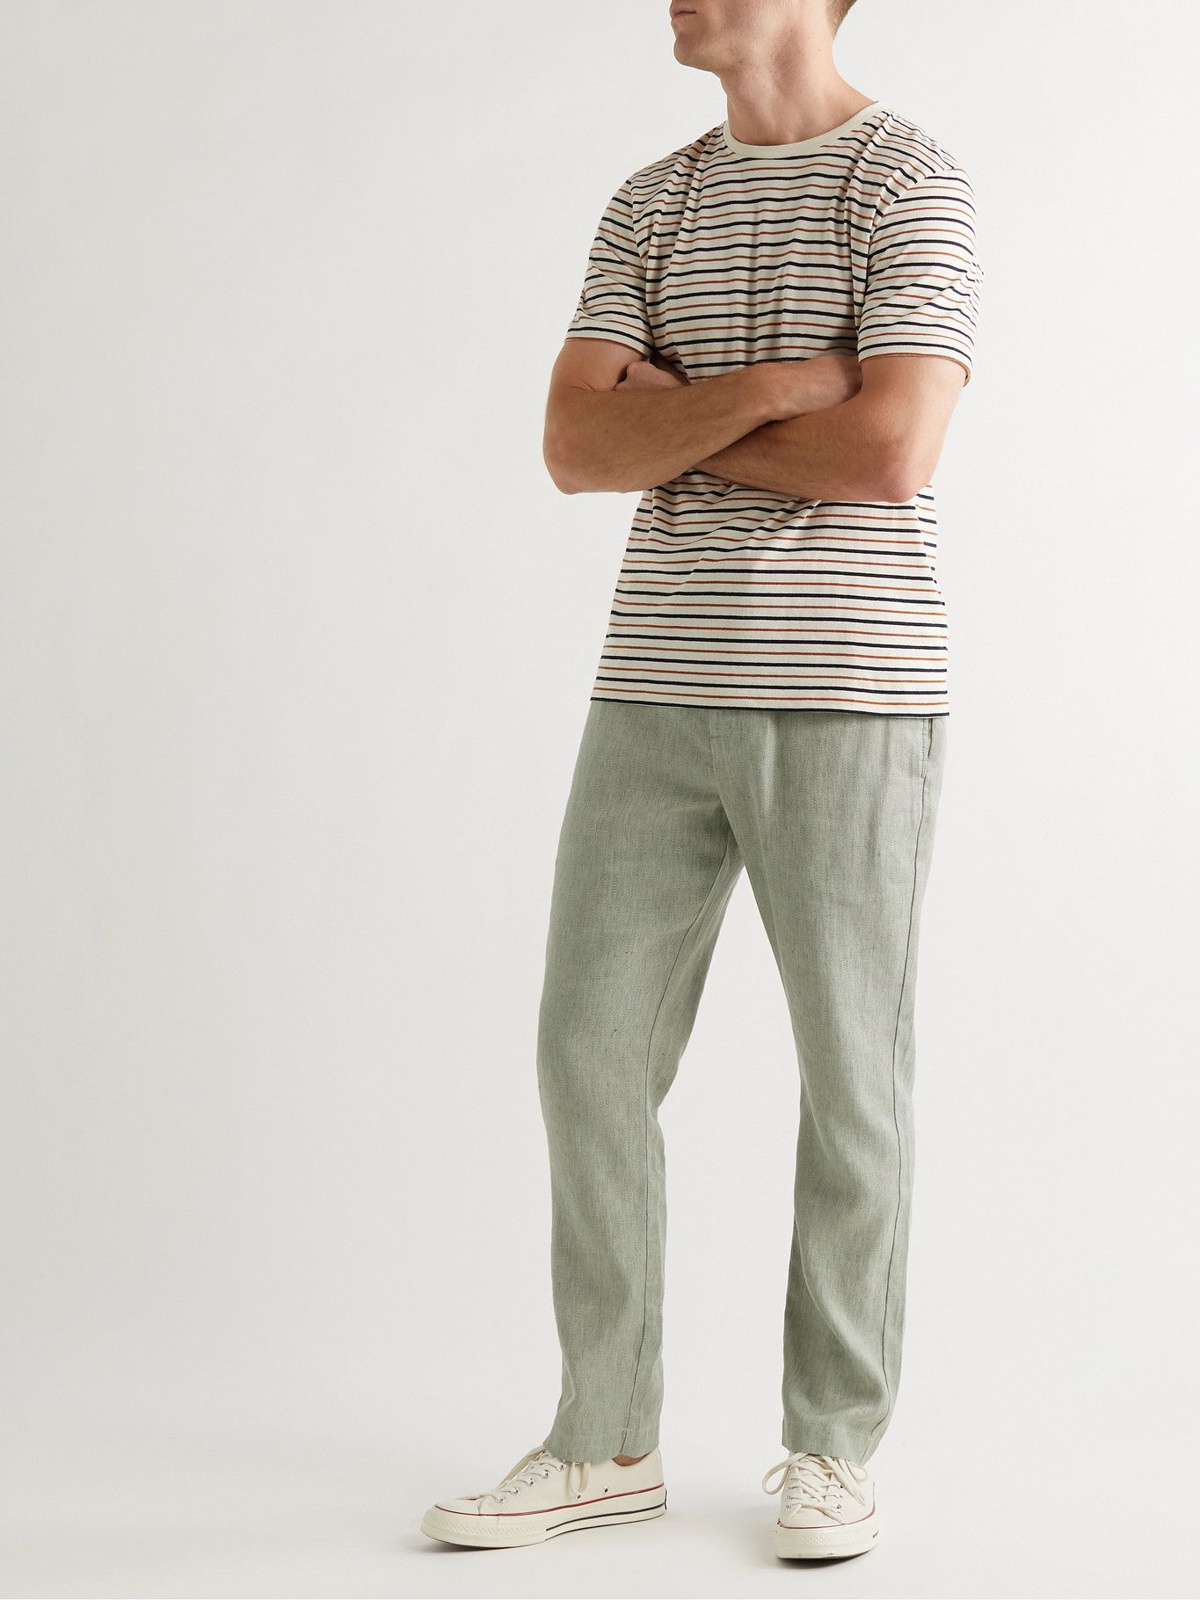 FRESCOBOL CARIOCA - Oscar Slim-Fit Tapered Linen and Cotton-Blend  Drawstring Trousers - Green